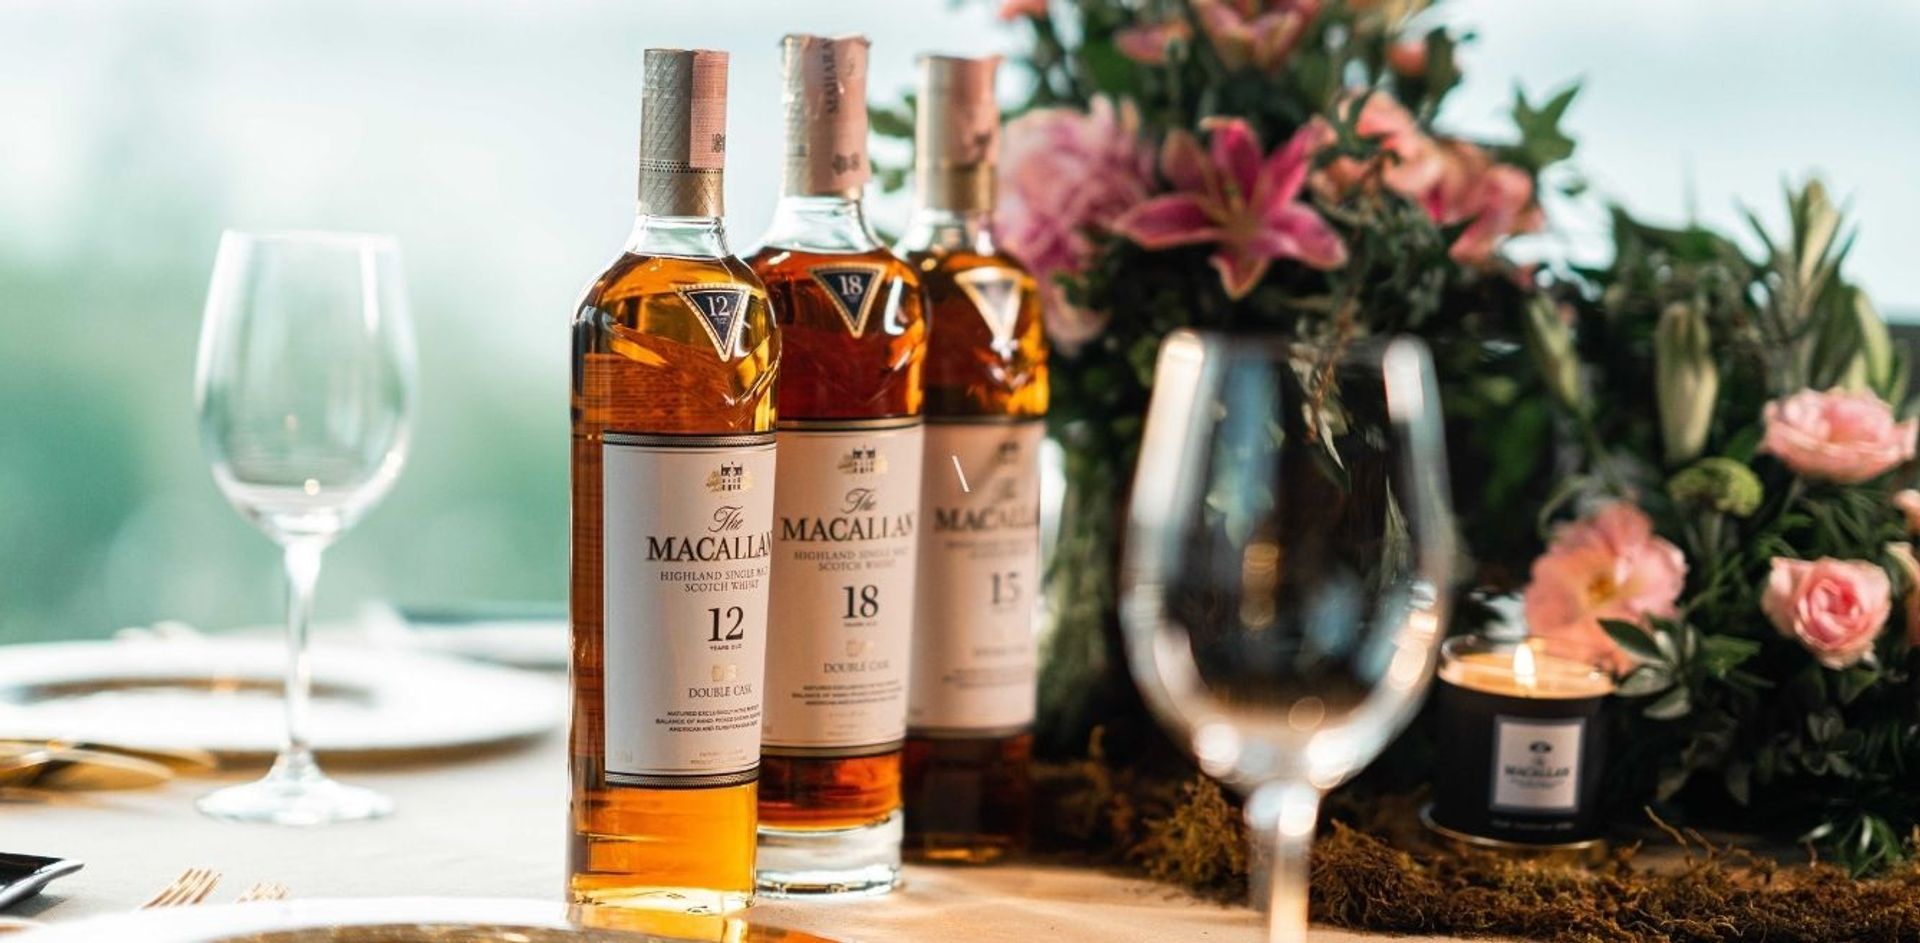 Macallan's Collaboration with Renowned Michelin-starred Chef Vineet Bhatia.